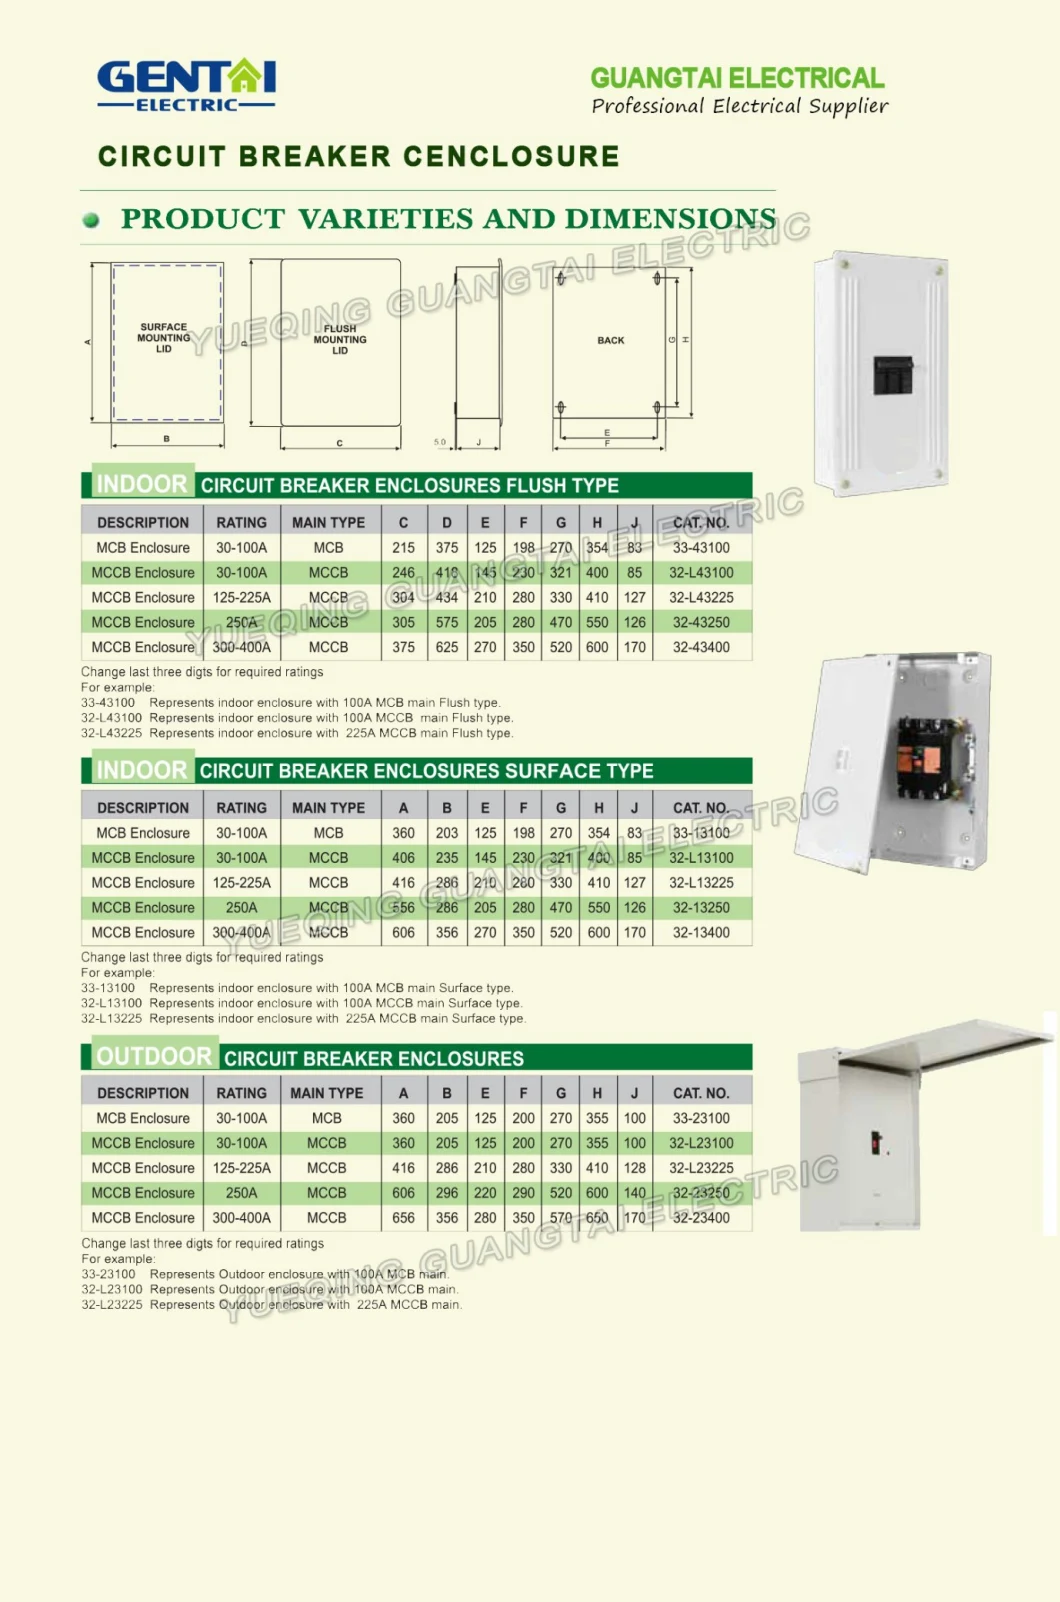 High Quality Cheaper Mitsubishi Type 4pole 400A Moulded Case Circuit Breaker